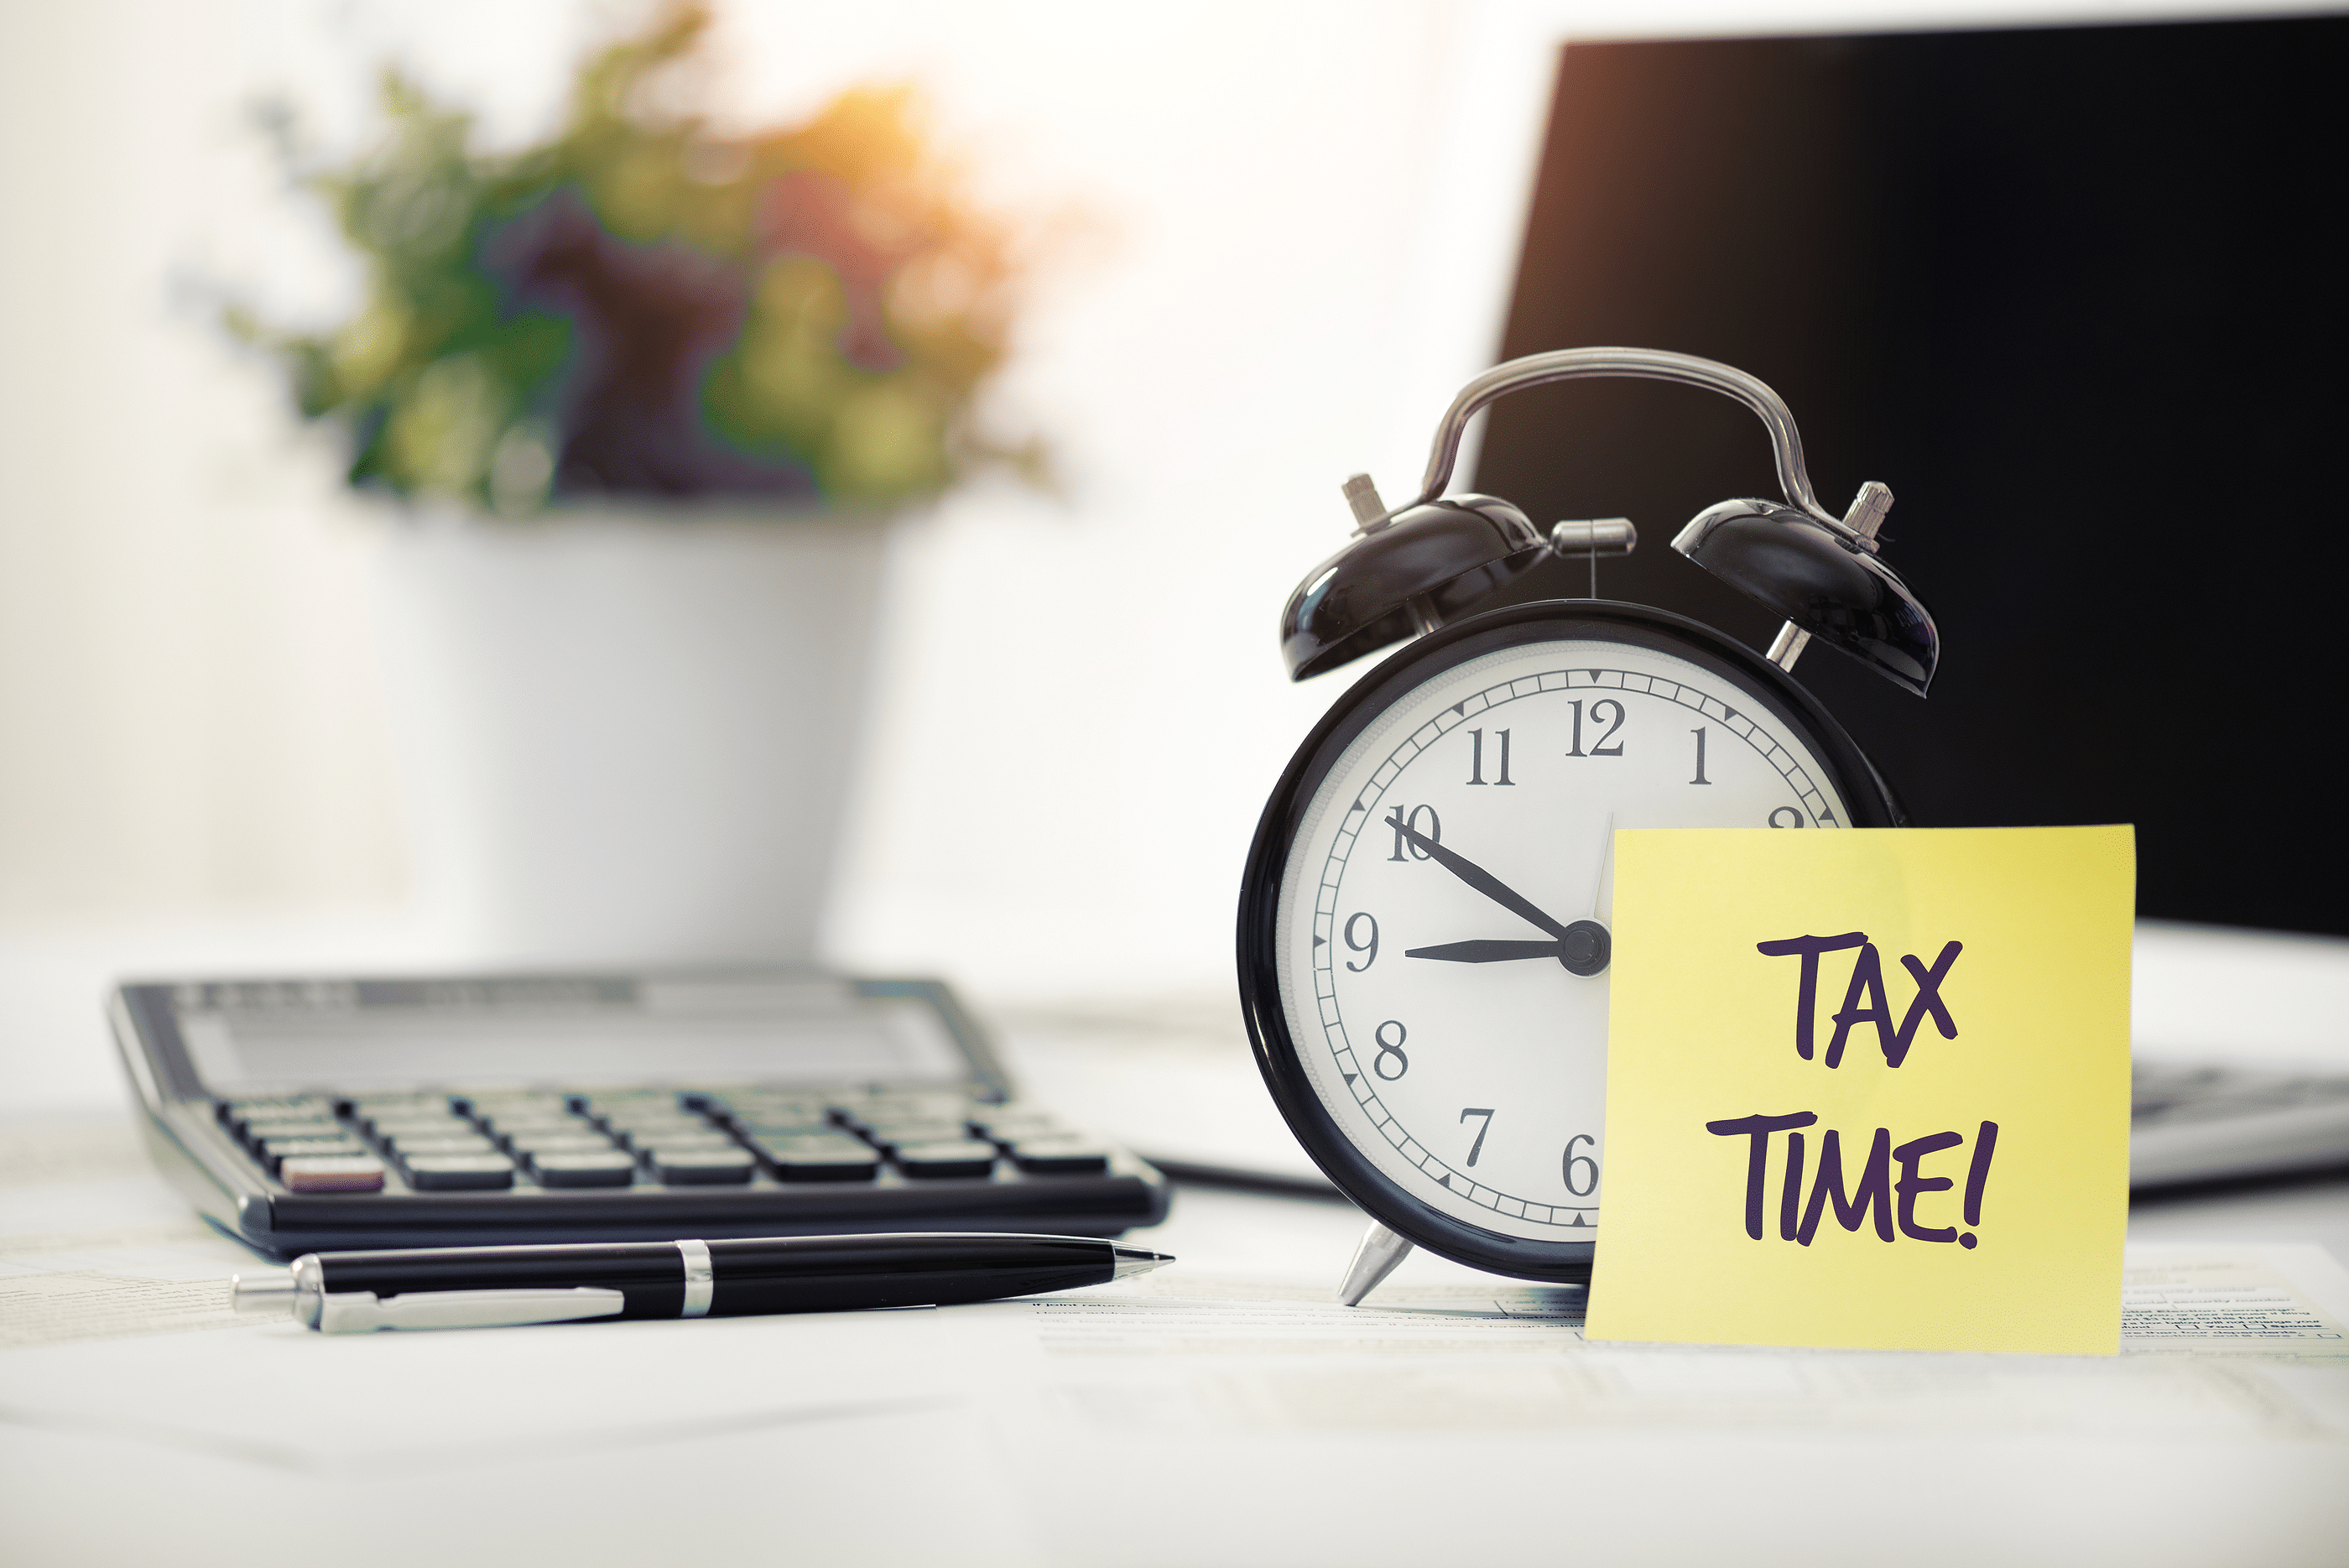 Employee Payroll and Taxes: What Business Owners Need To Know